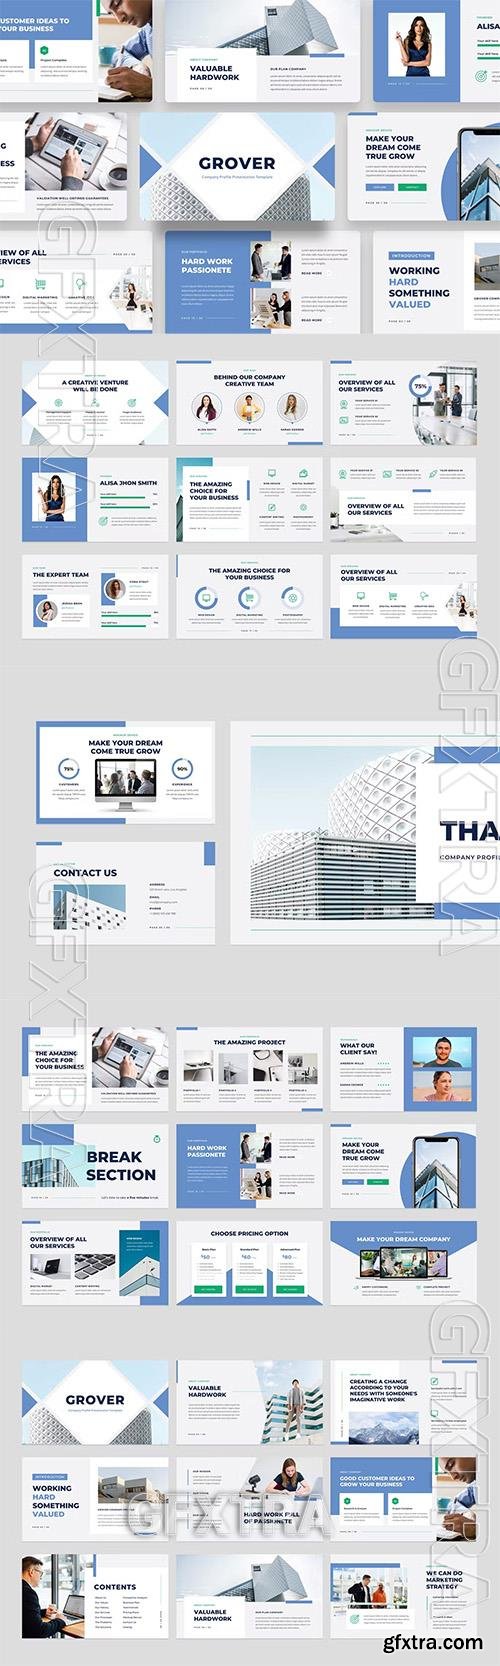 Grover - Company Profile Powerpoint, Keynote and Google Slides Templates